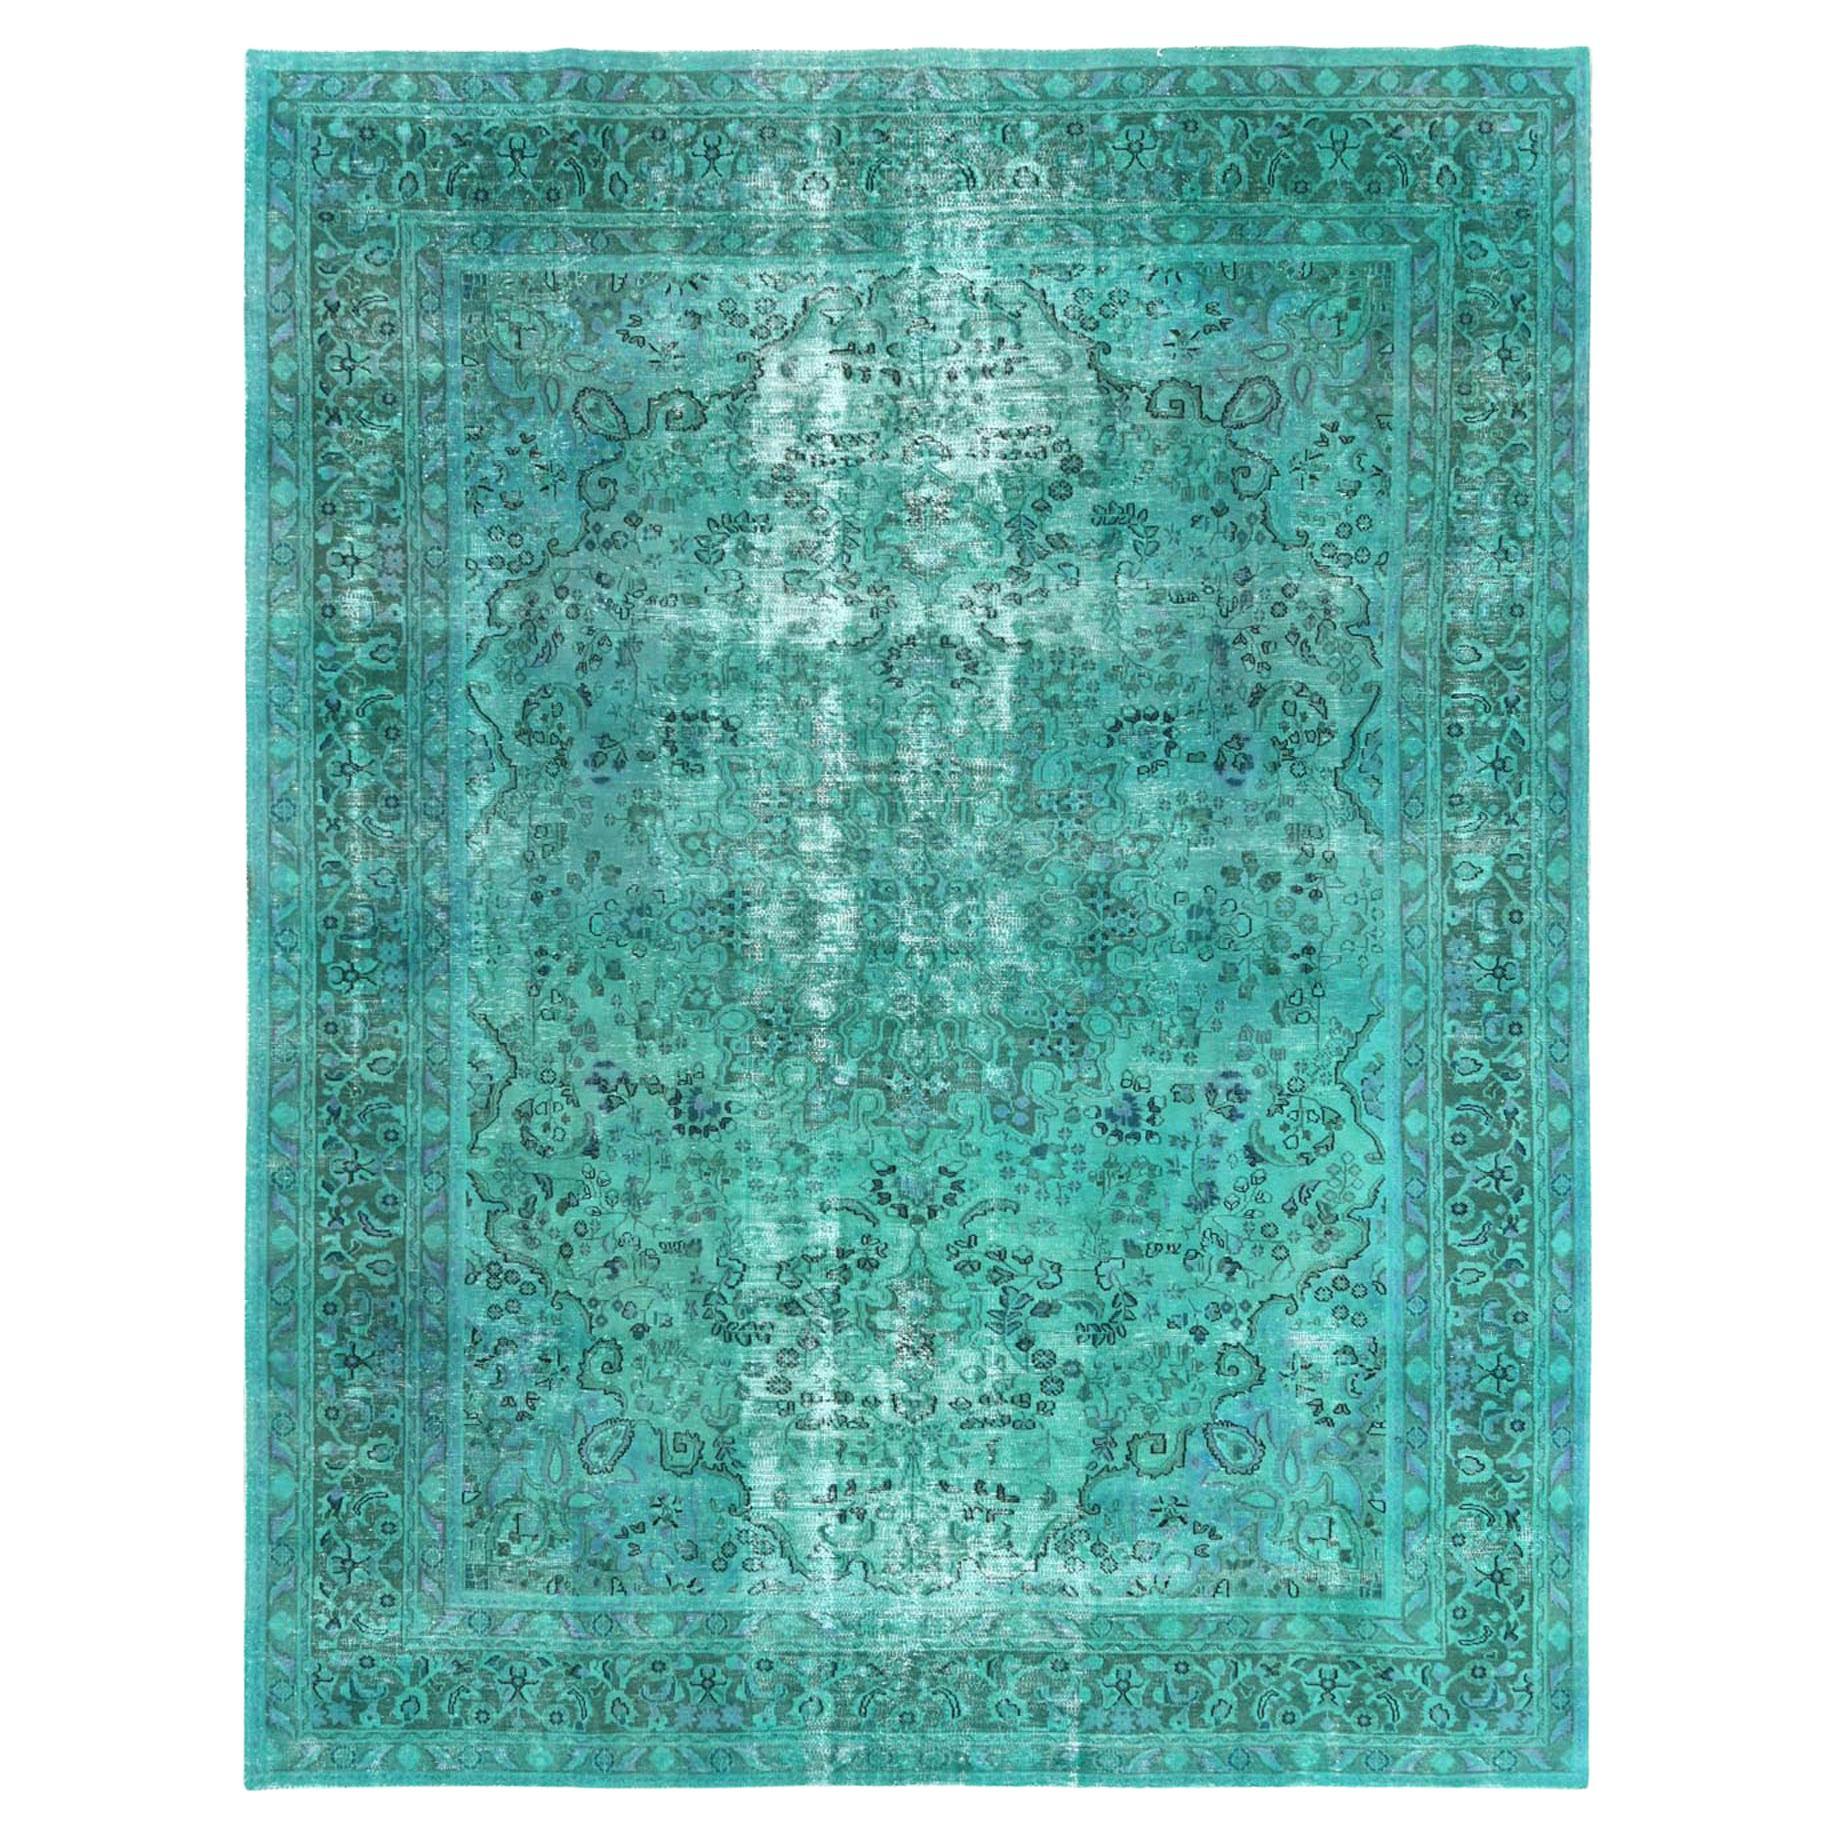 Teal Green Vintage Overdyed Persian Tabriz Distressed Worn Wool Hand Knotted Rug